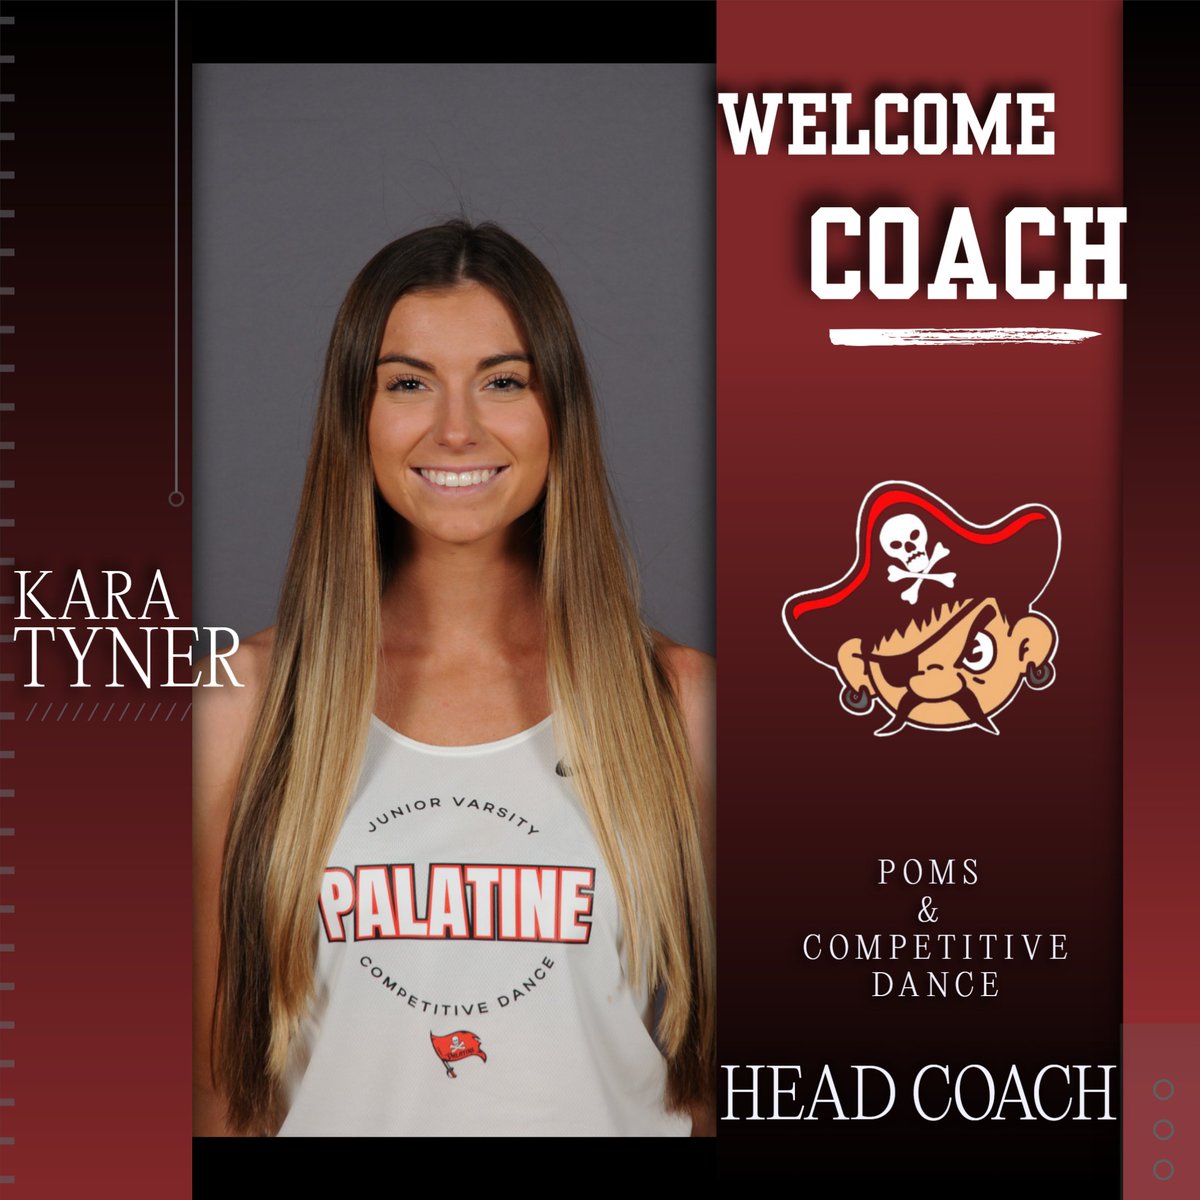 Congratulations to our new head coach! Ms. Kara Tyner will be our head girls poms and competitive dance coach. She has graduated from ISU and Buffalo Grove High School. Welcome!